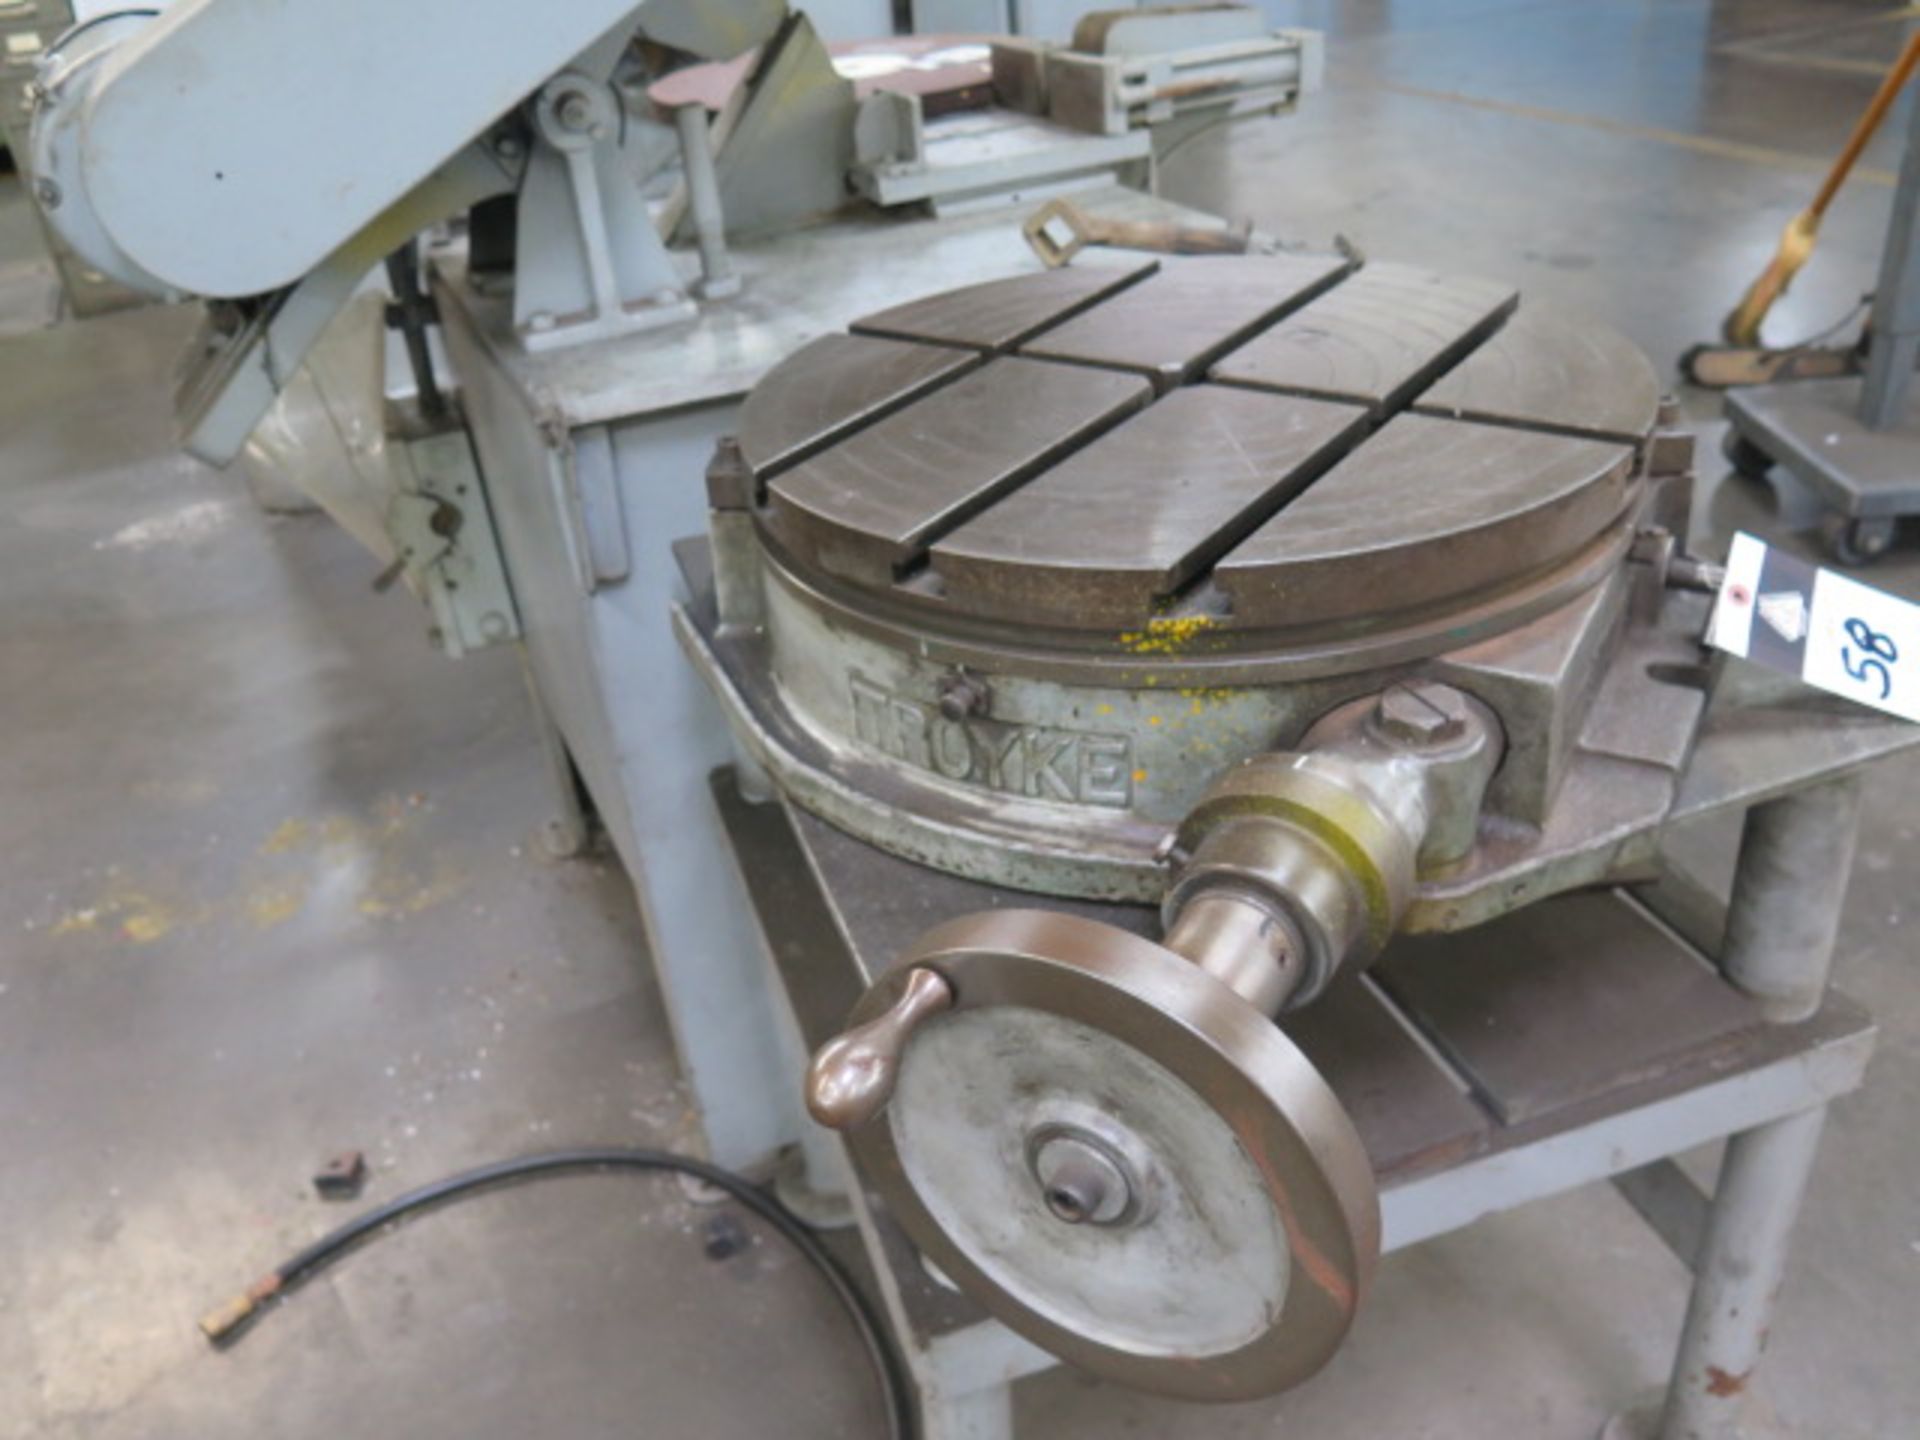 Troyke 21" Rotary Table w/ Table (SOLD AS-IS - NO WARRANTY) - Image 2 of 4